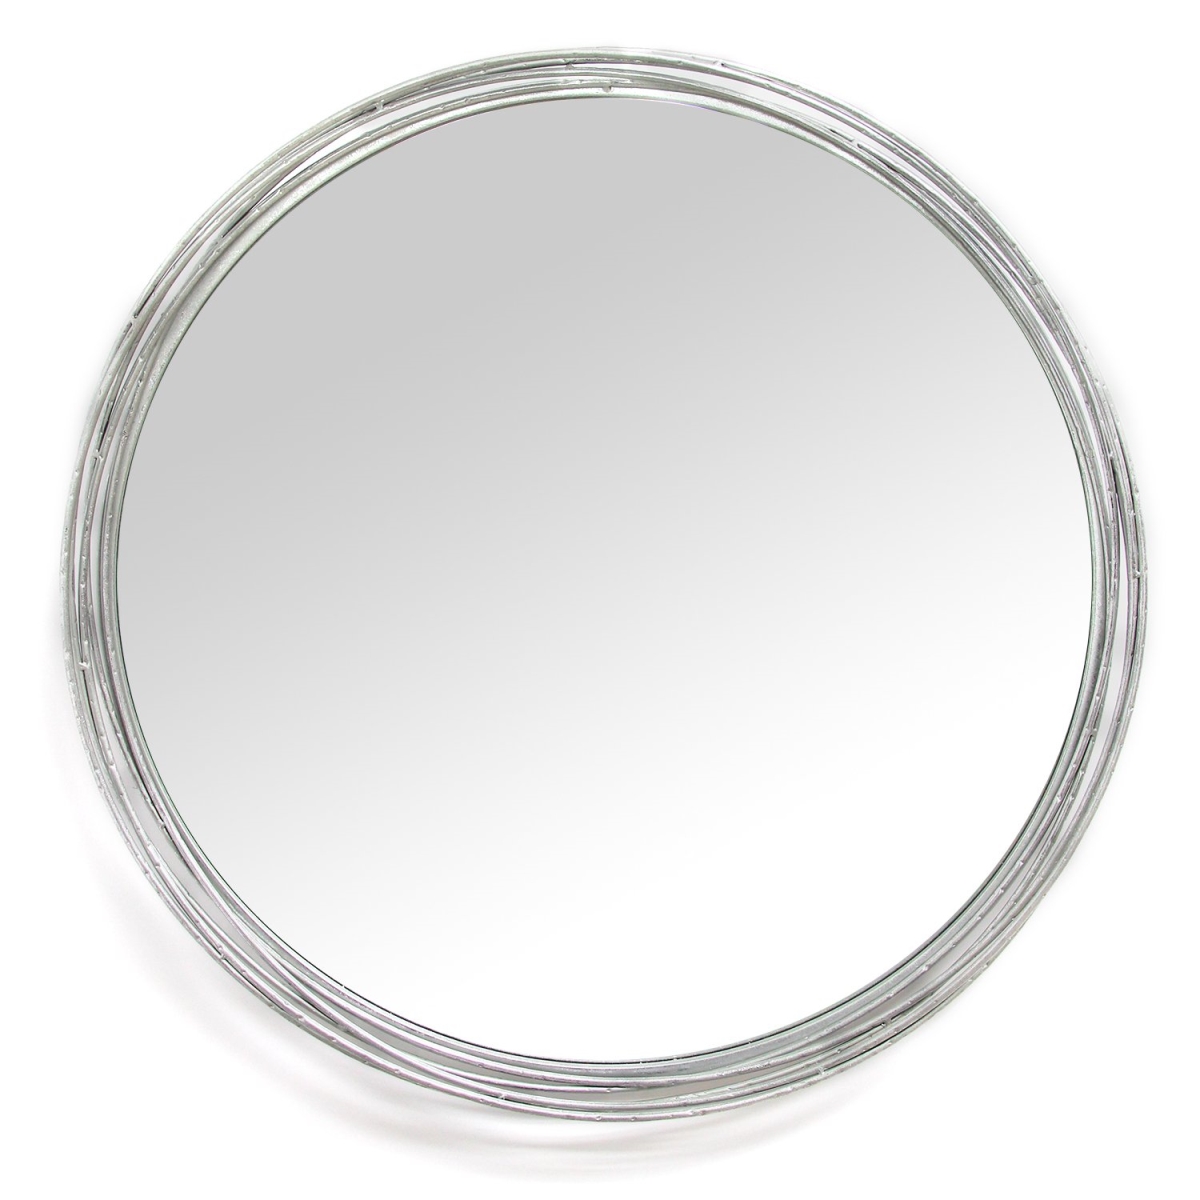 Home Roots 321171 Statement Wall Mirror, Silver